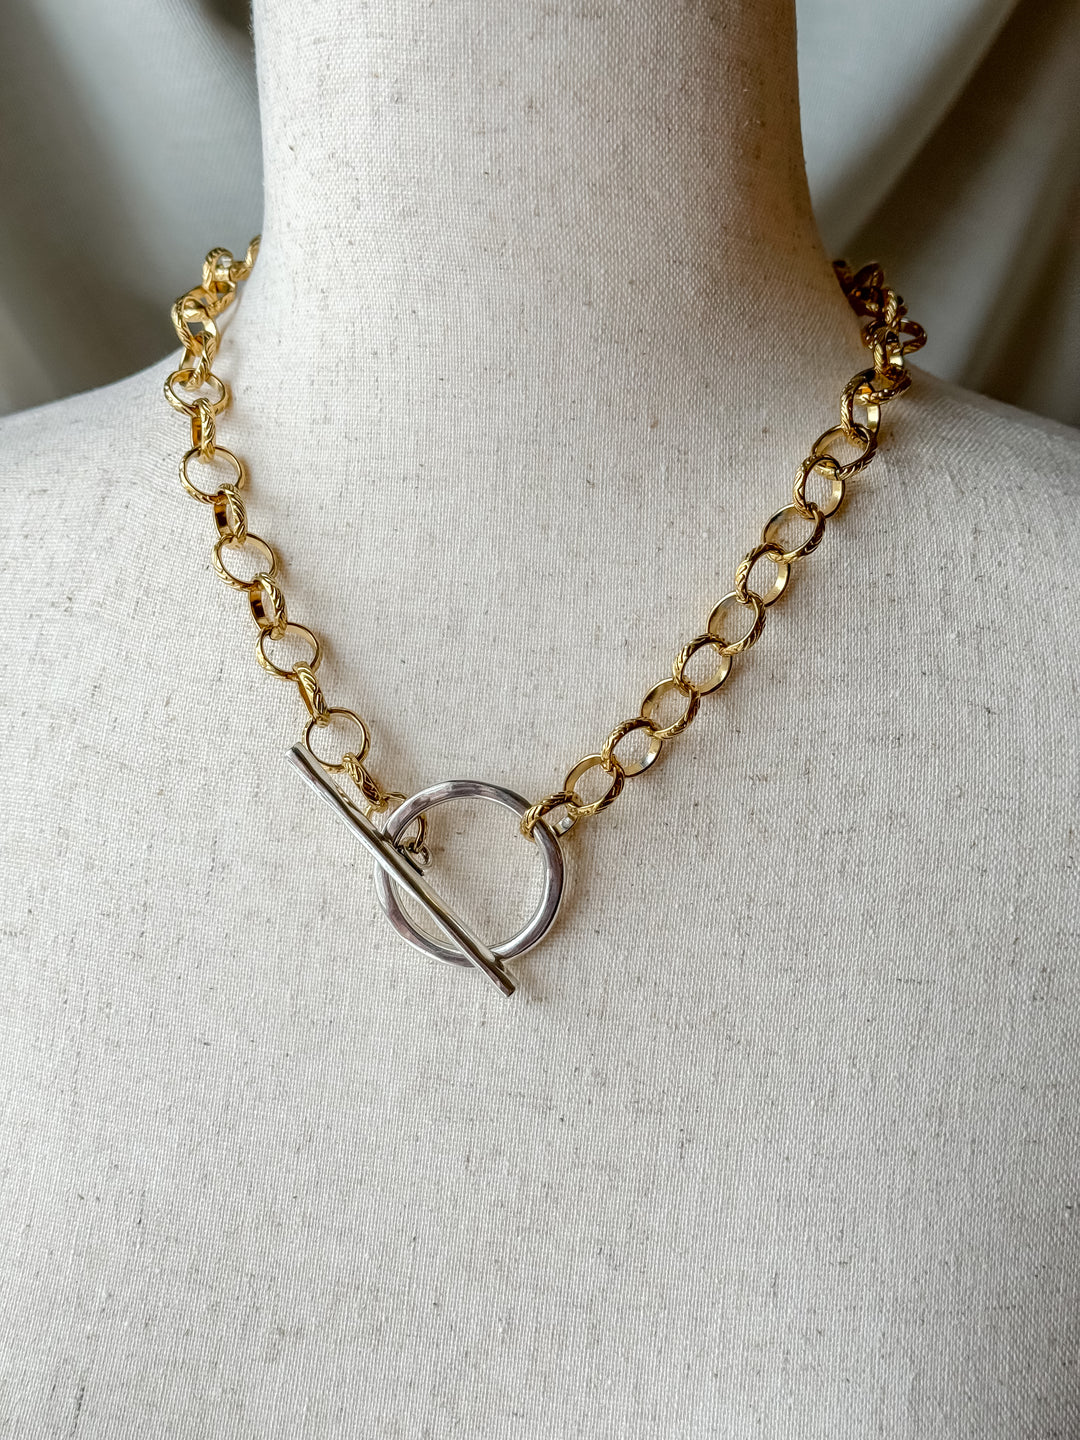 Metro Modern Oversized Toggle Necklace in Mixed Metals